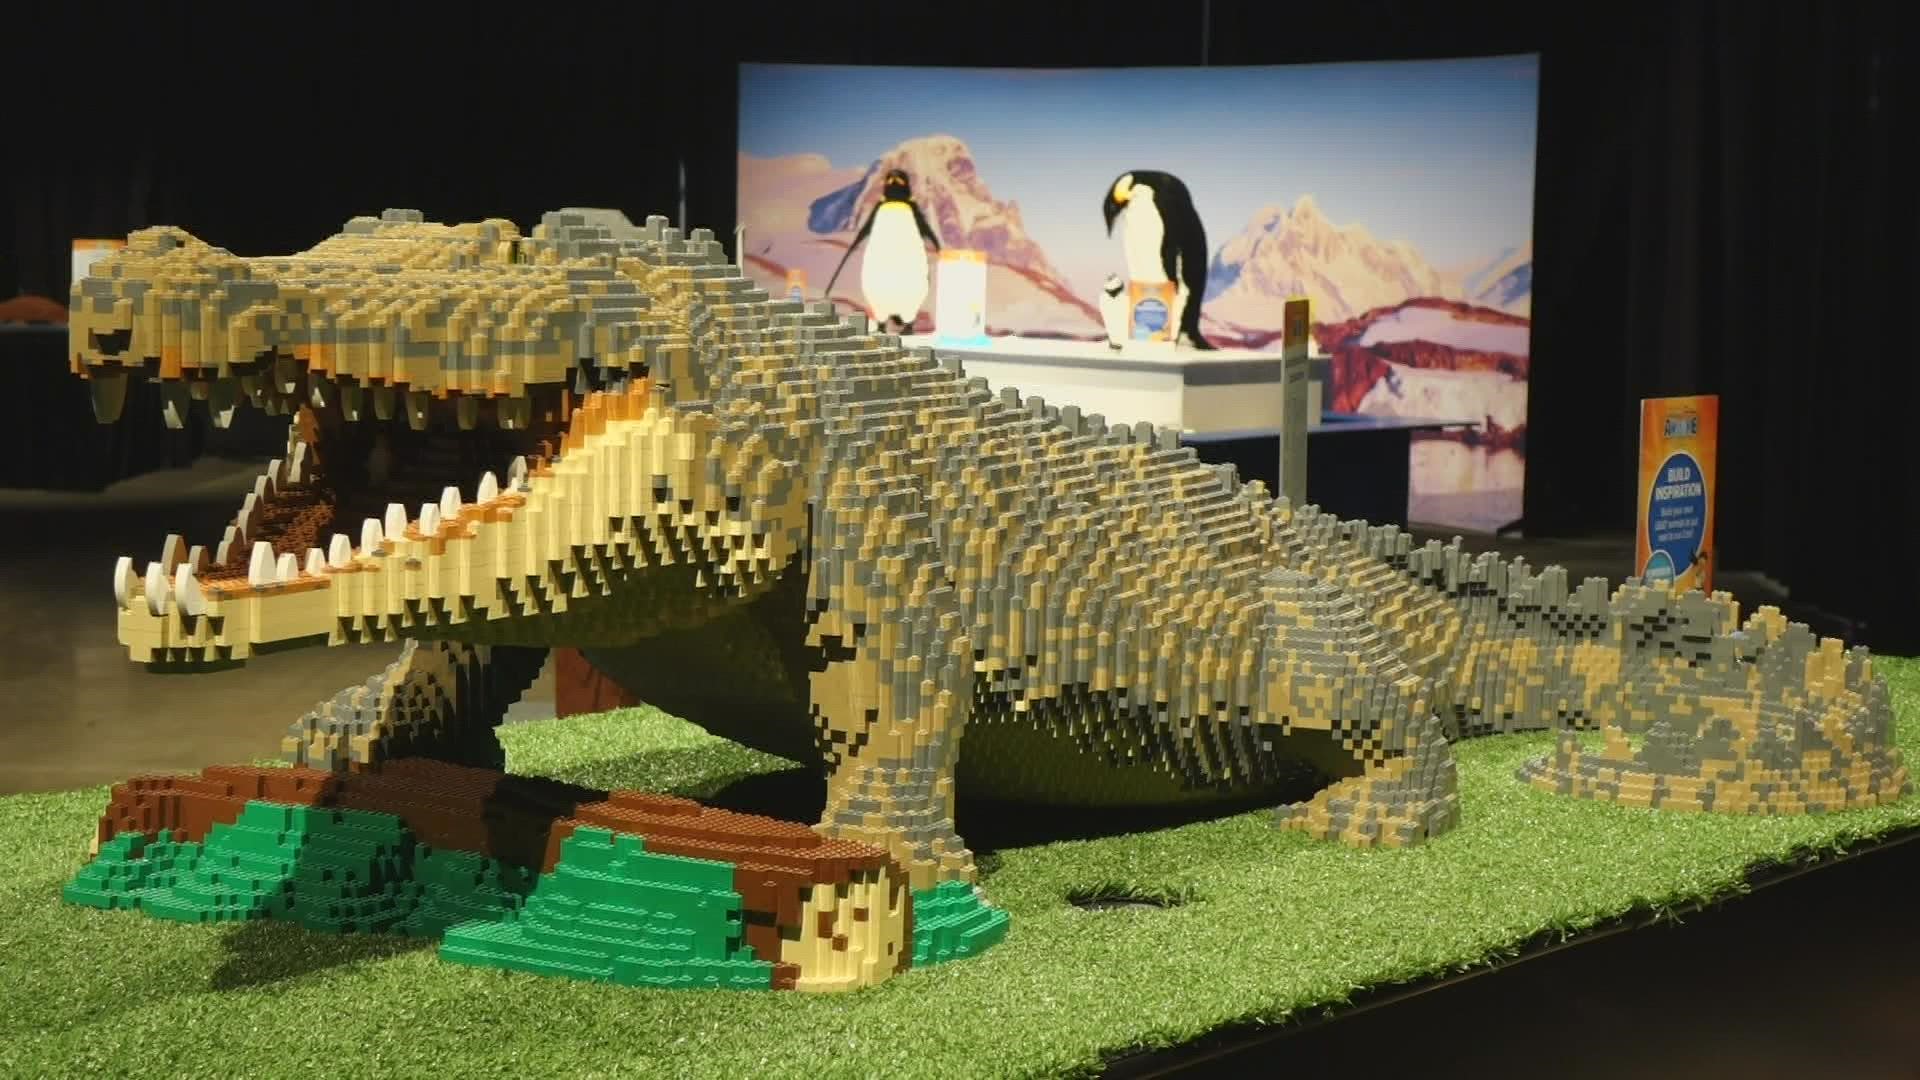 Justering Centrum Auto LEGO exhibition on display at Seattle Center | king5.com